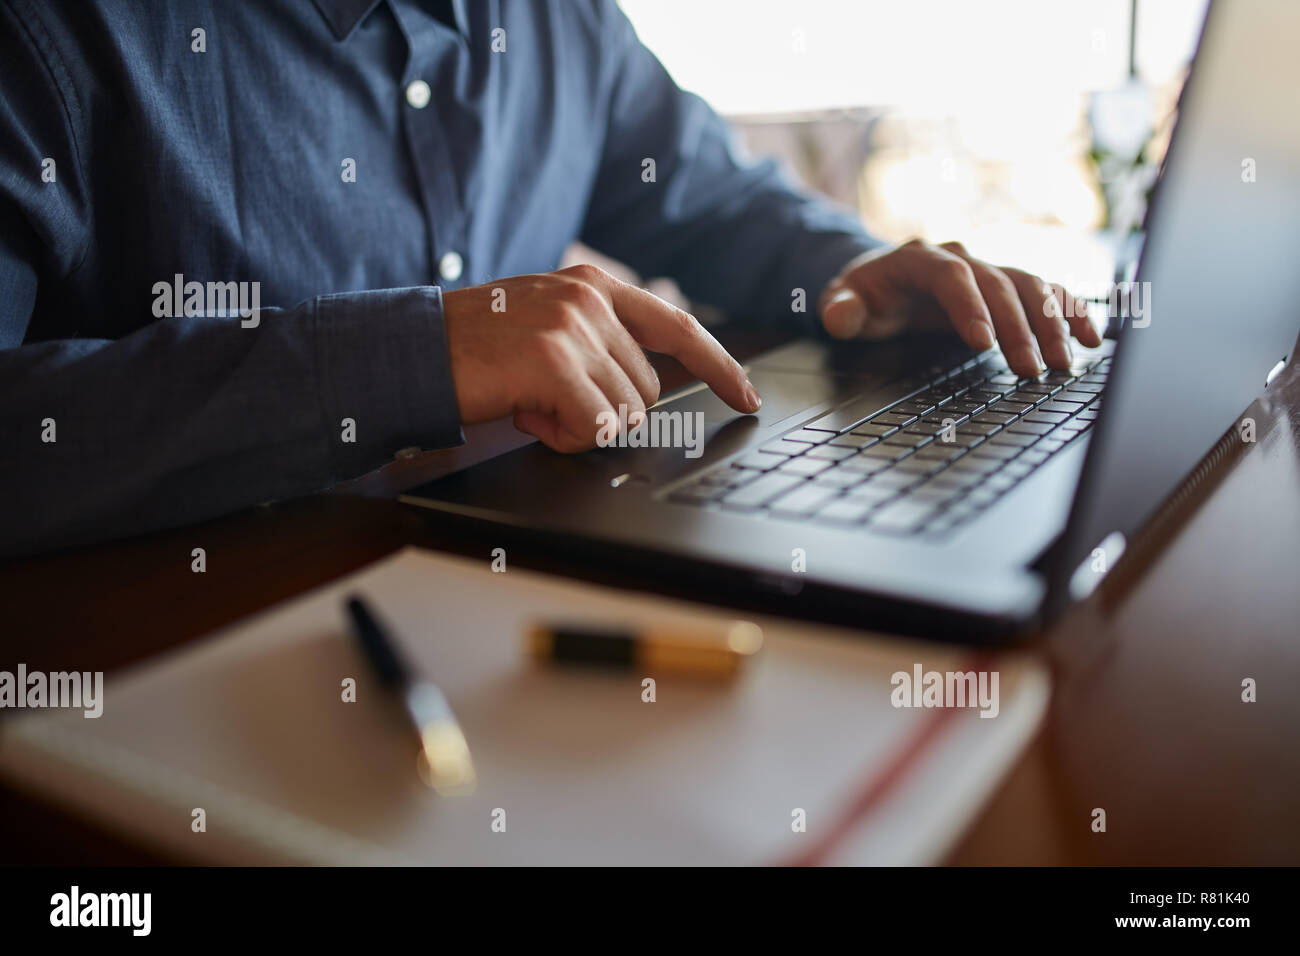 Close-up photo of caucasian male hands typing on laptop keyboard and using  touchpad. Notebook and pen on foreground of workspace. Business man working  on computer. Isolated no face view Stock Photo -